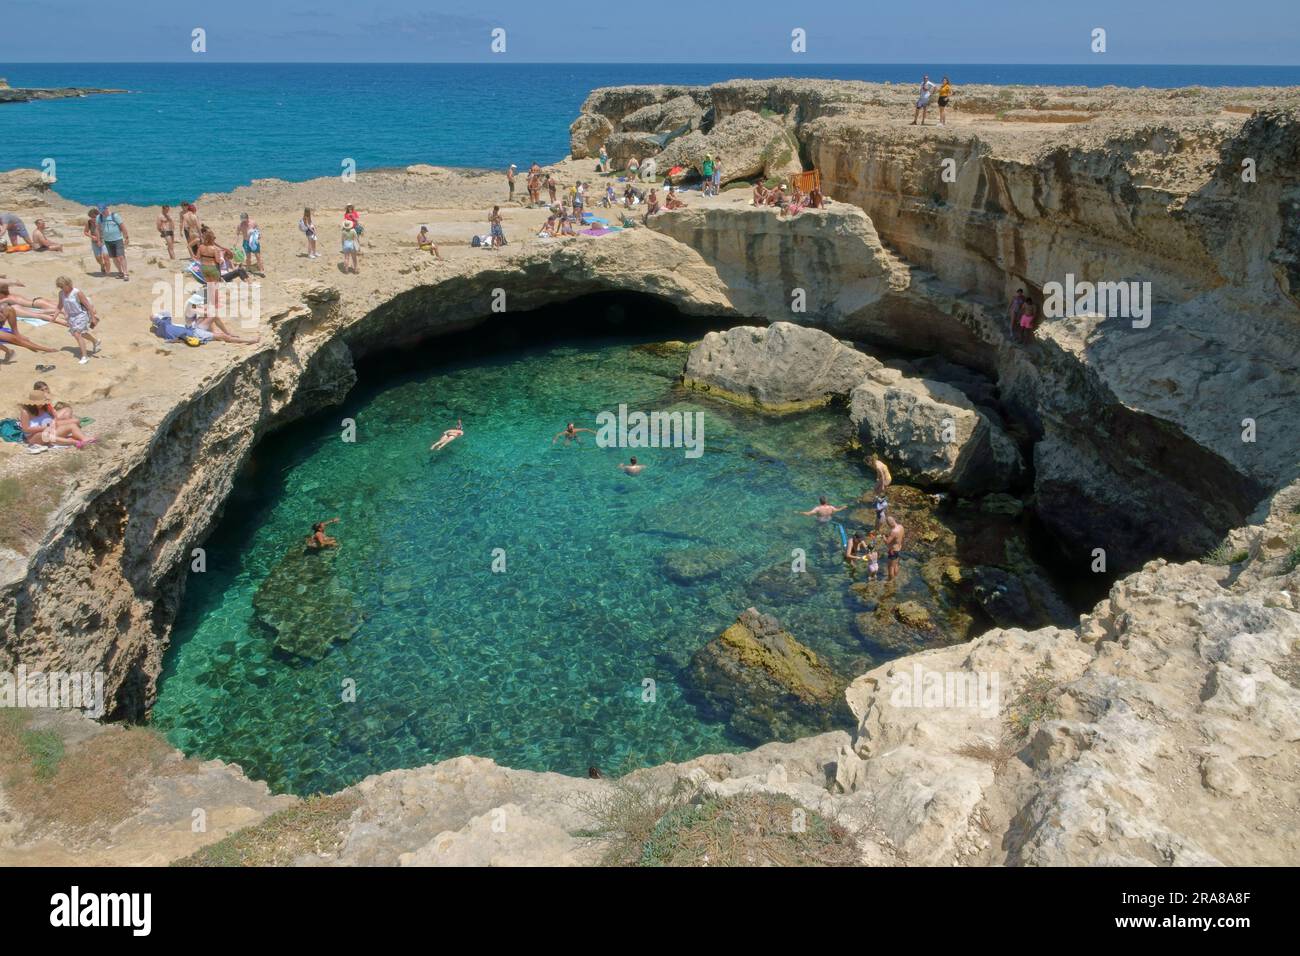 Lecce, Italy / June 8, 2023: The Grotta della Poesia (aka Cave of Poetry) natural seawater pool is shown during the day. Stock Photo